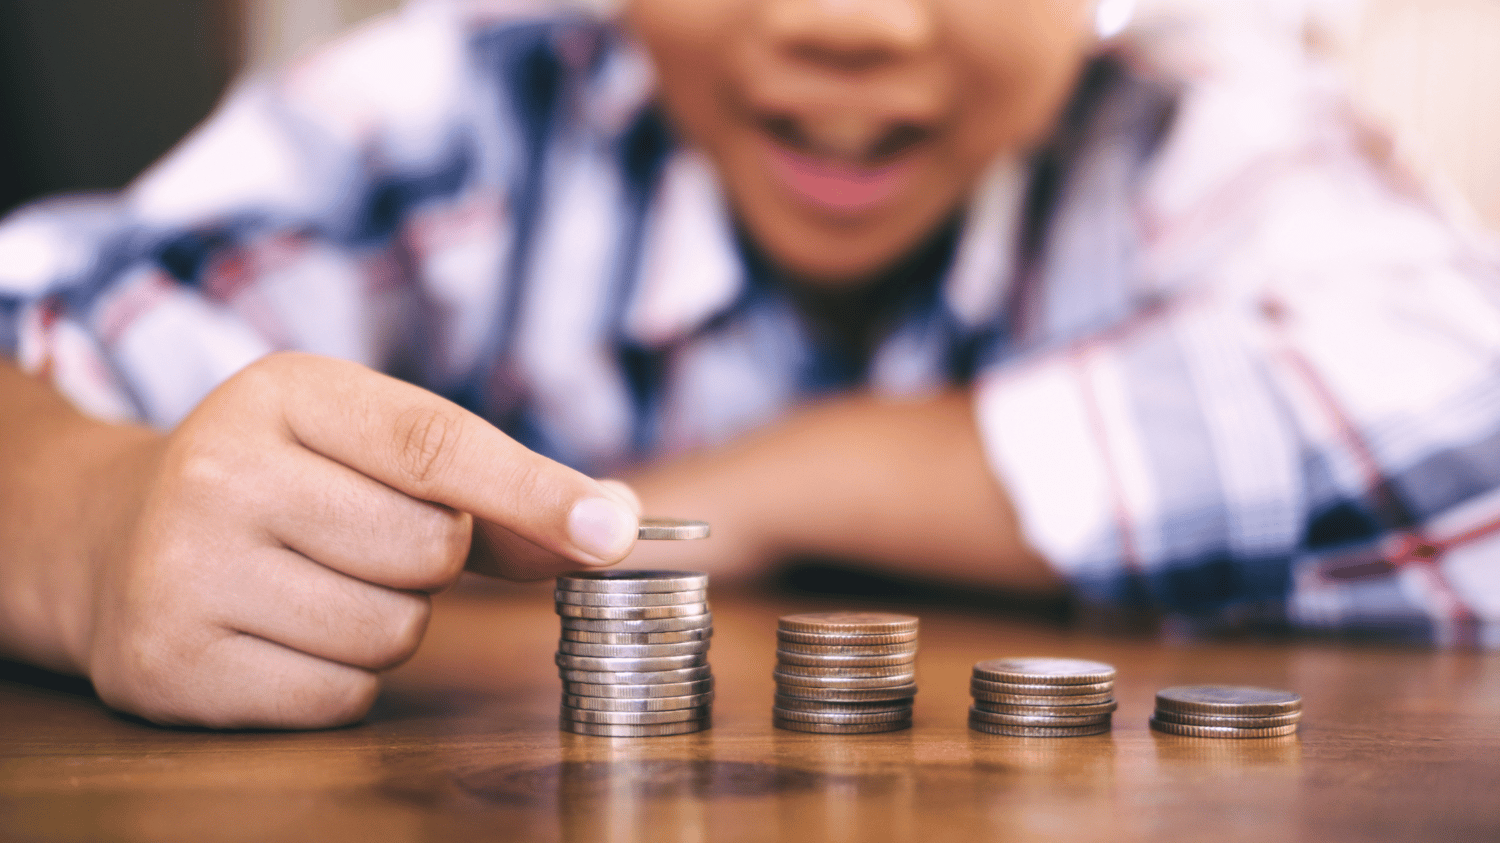 RAISING FINANCIALLY SAVVY KIDS: EMPOWERING THE NEXT GENERATION WITH FINANCIAL LITERACY